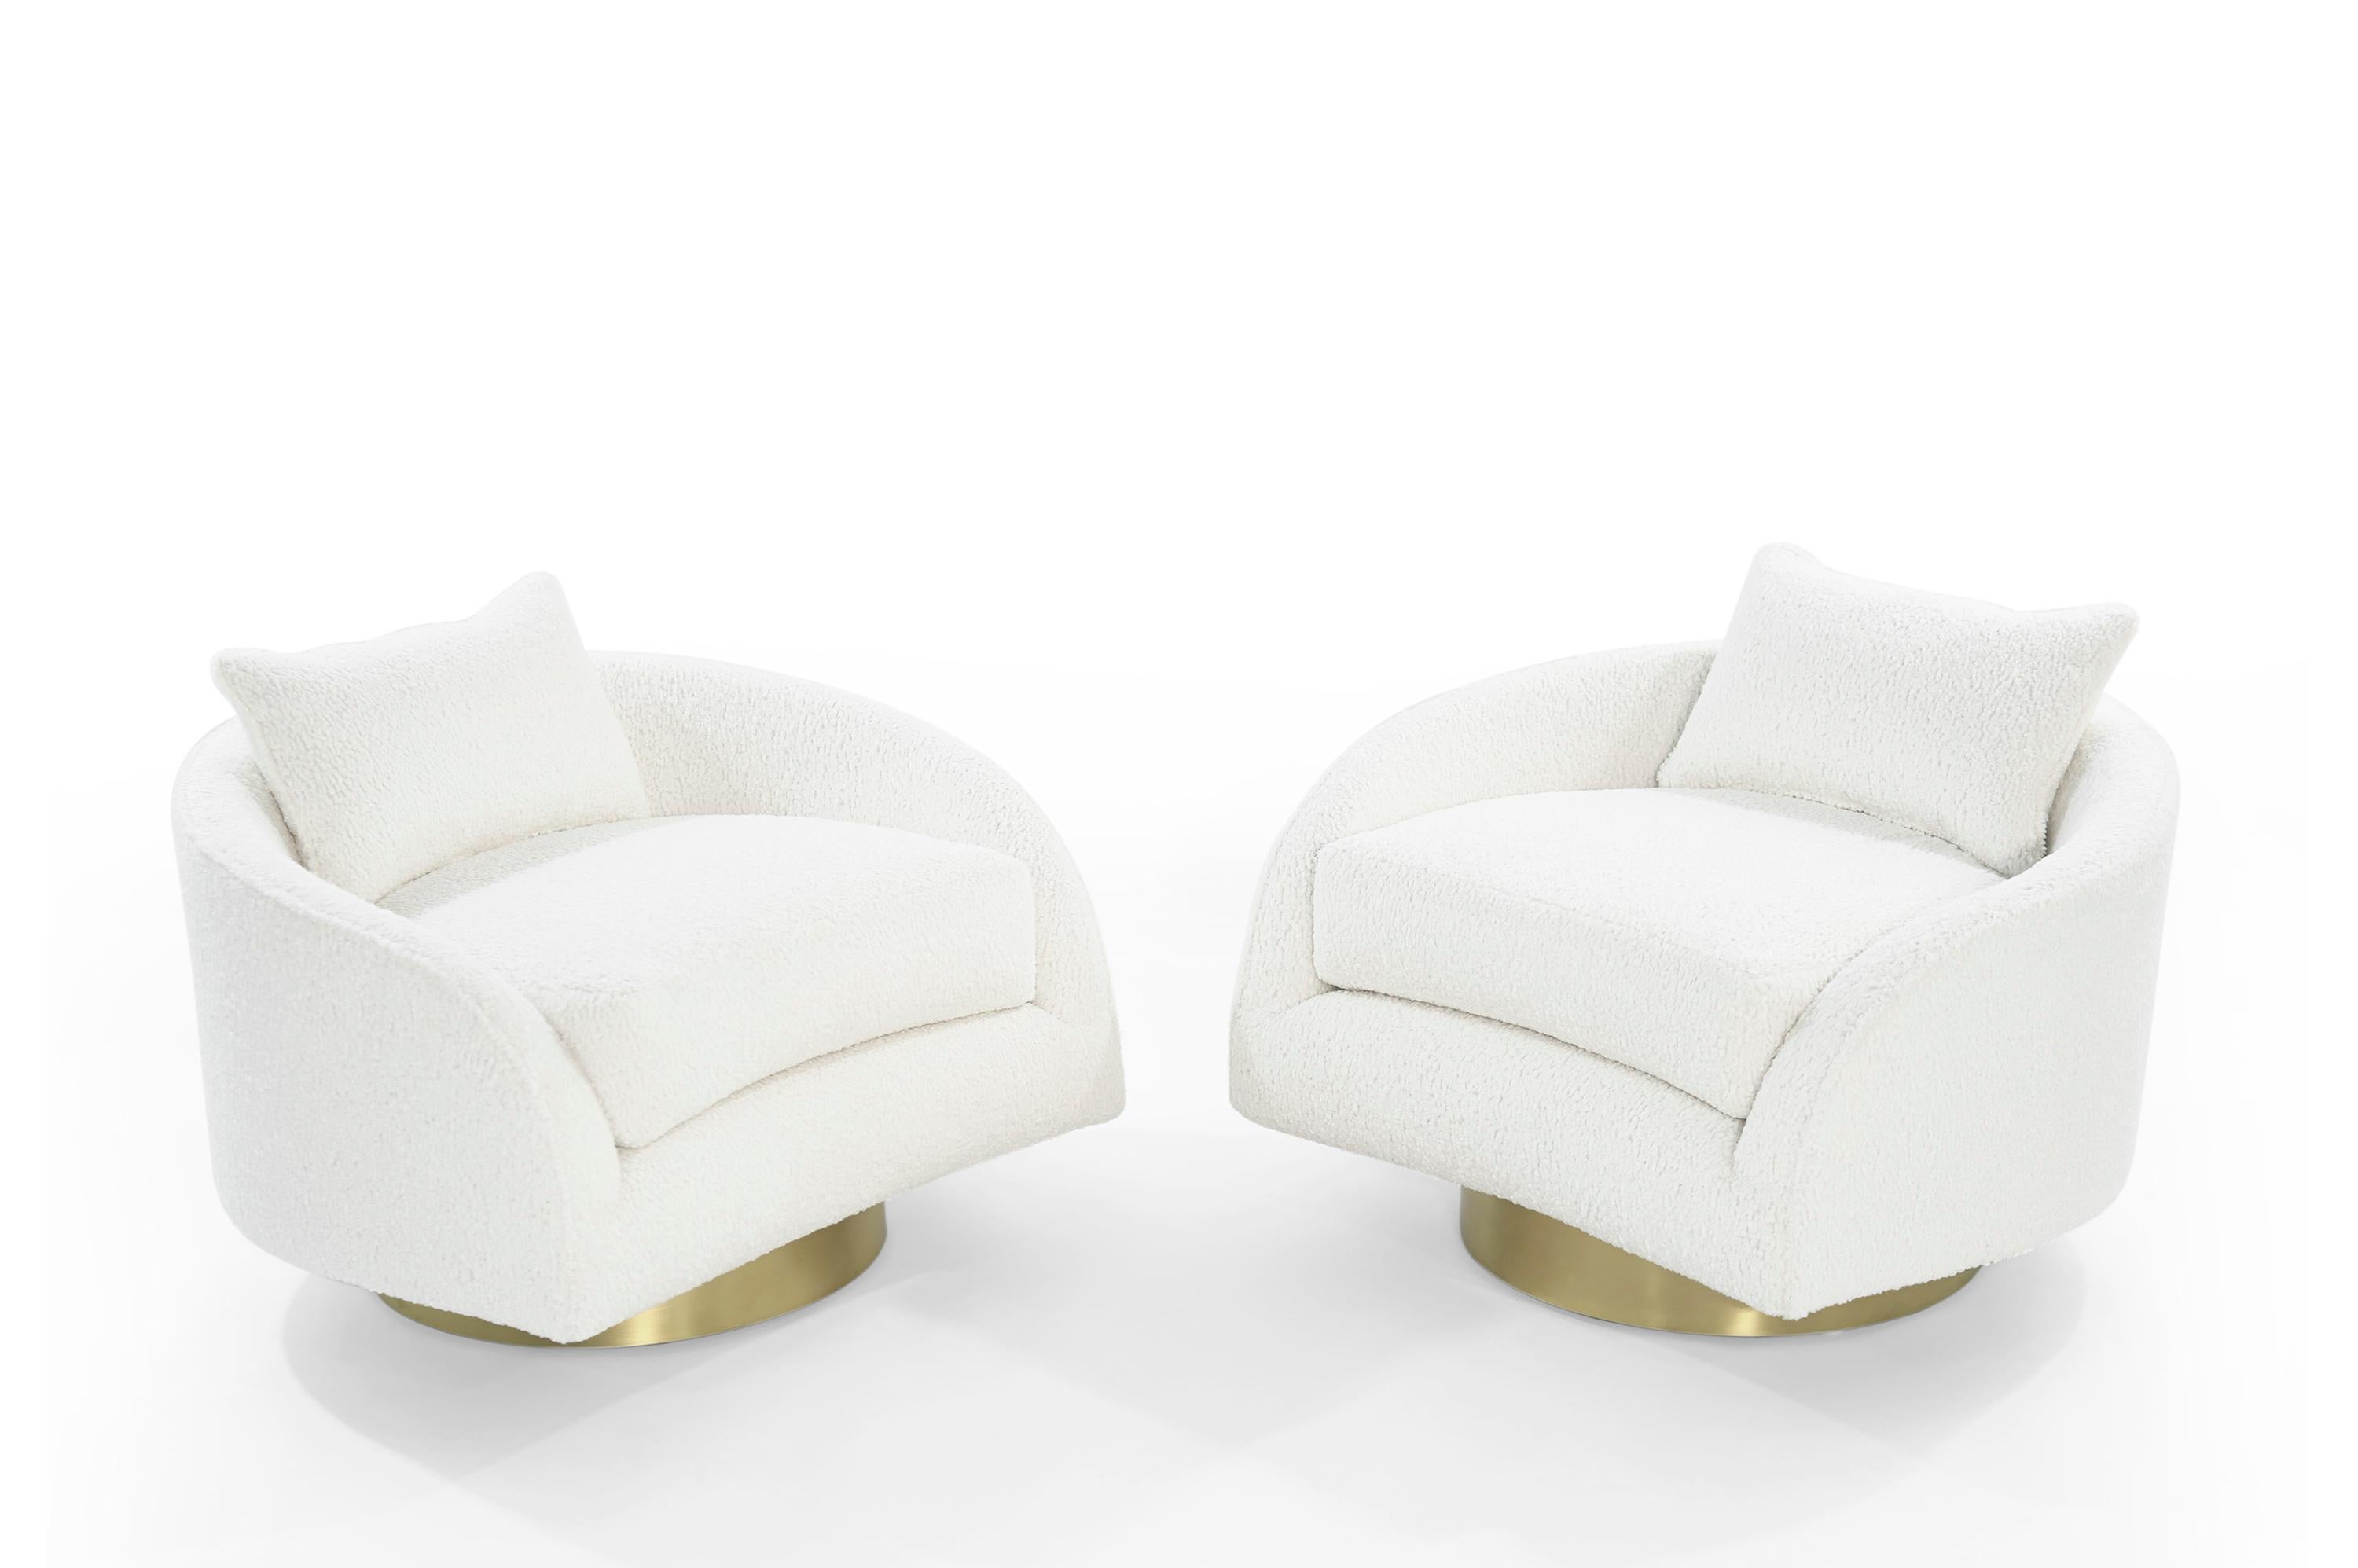 Extremely comfortable set of low-wide profile swivel lounges designed by Adrian Pearsall for Craft Associates, circa 1950s.

Re-upholstered in white bouclé. Newly fitted brushed brass bases with new swivel mechanism. Theses are super comfortable